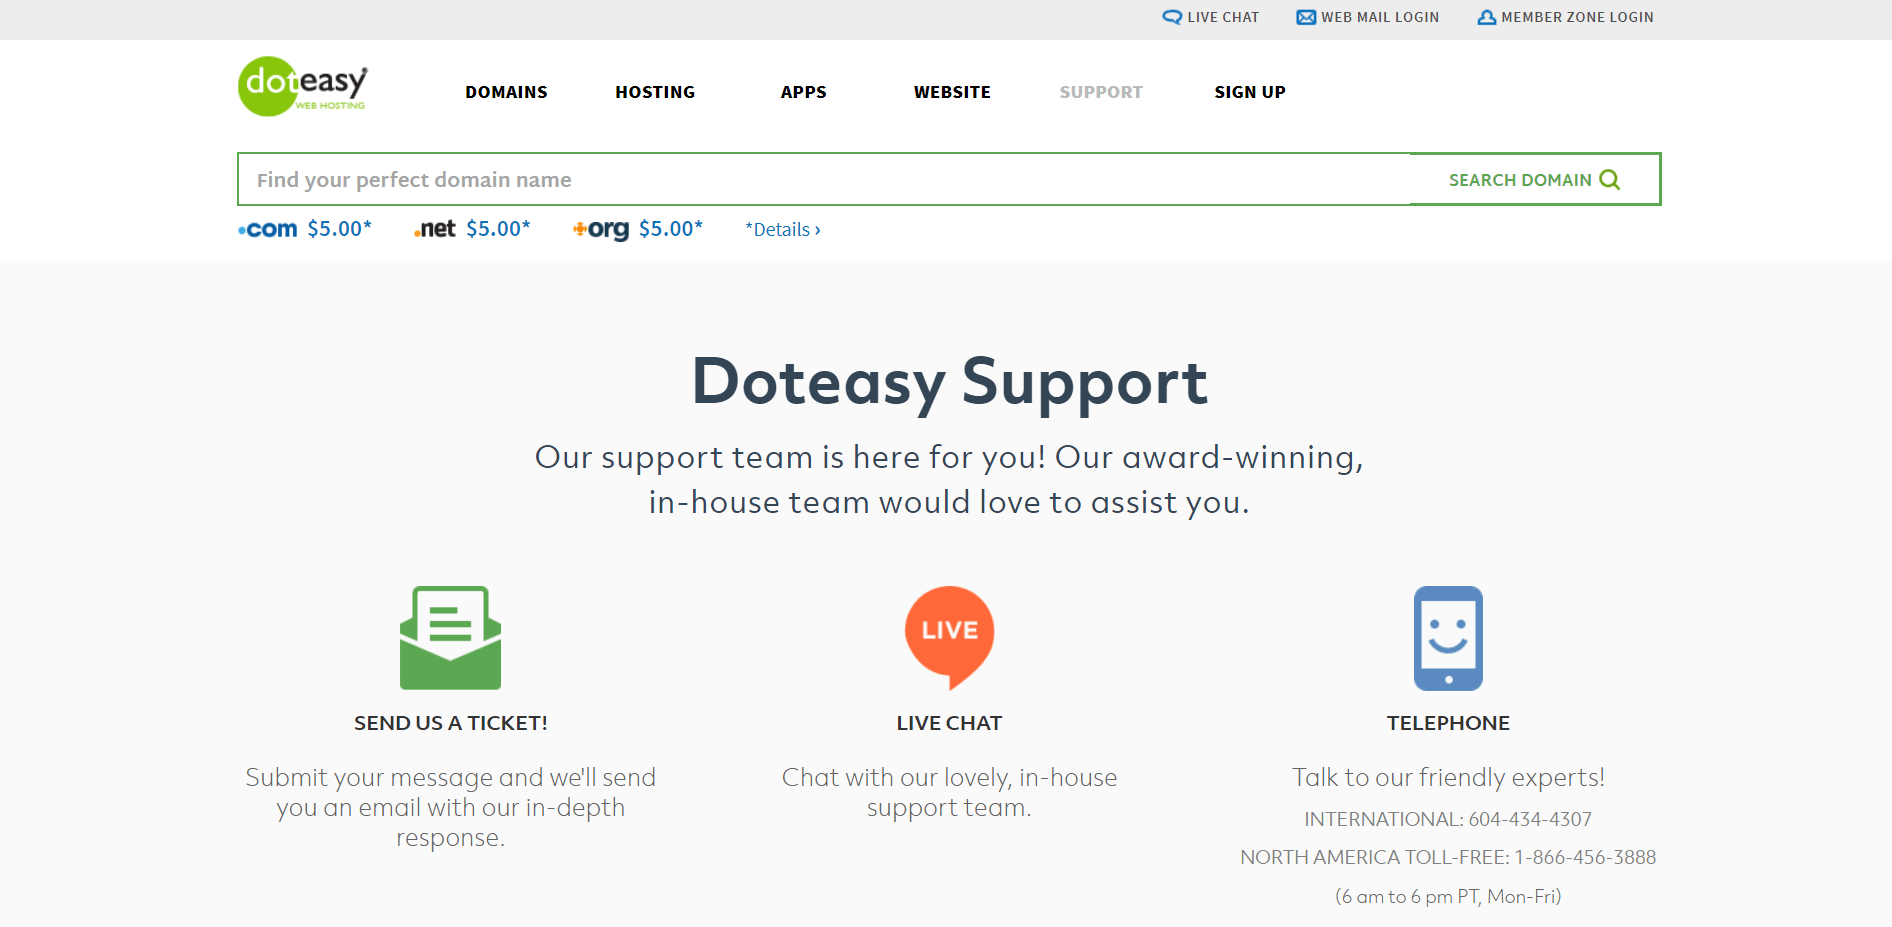 Doteasy-support